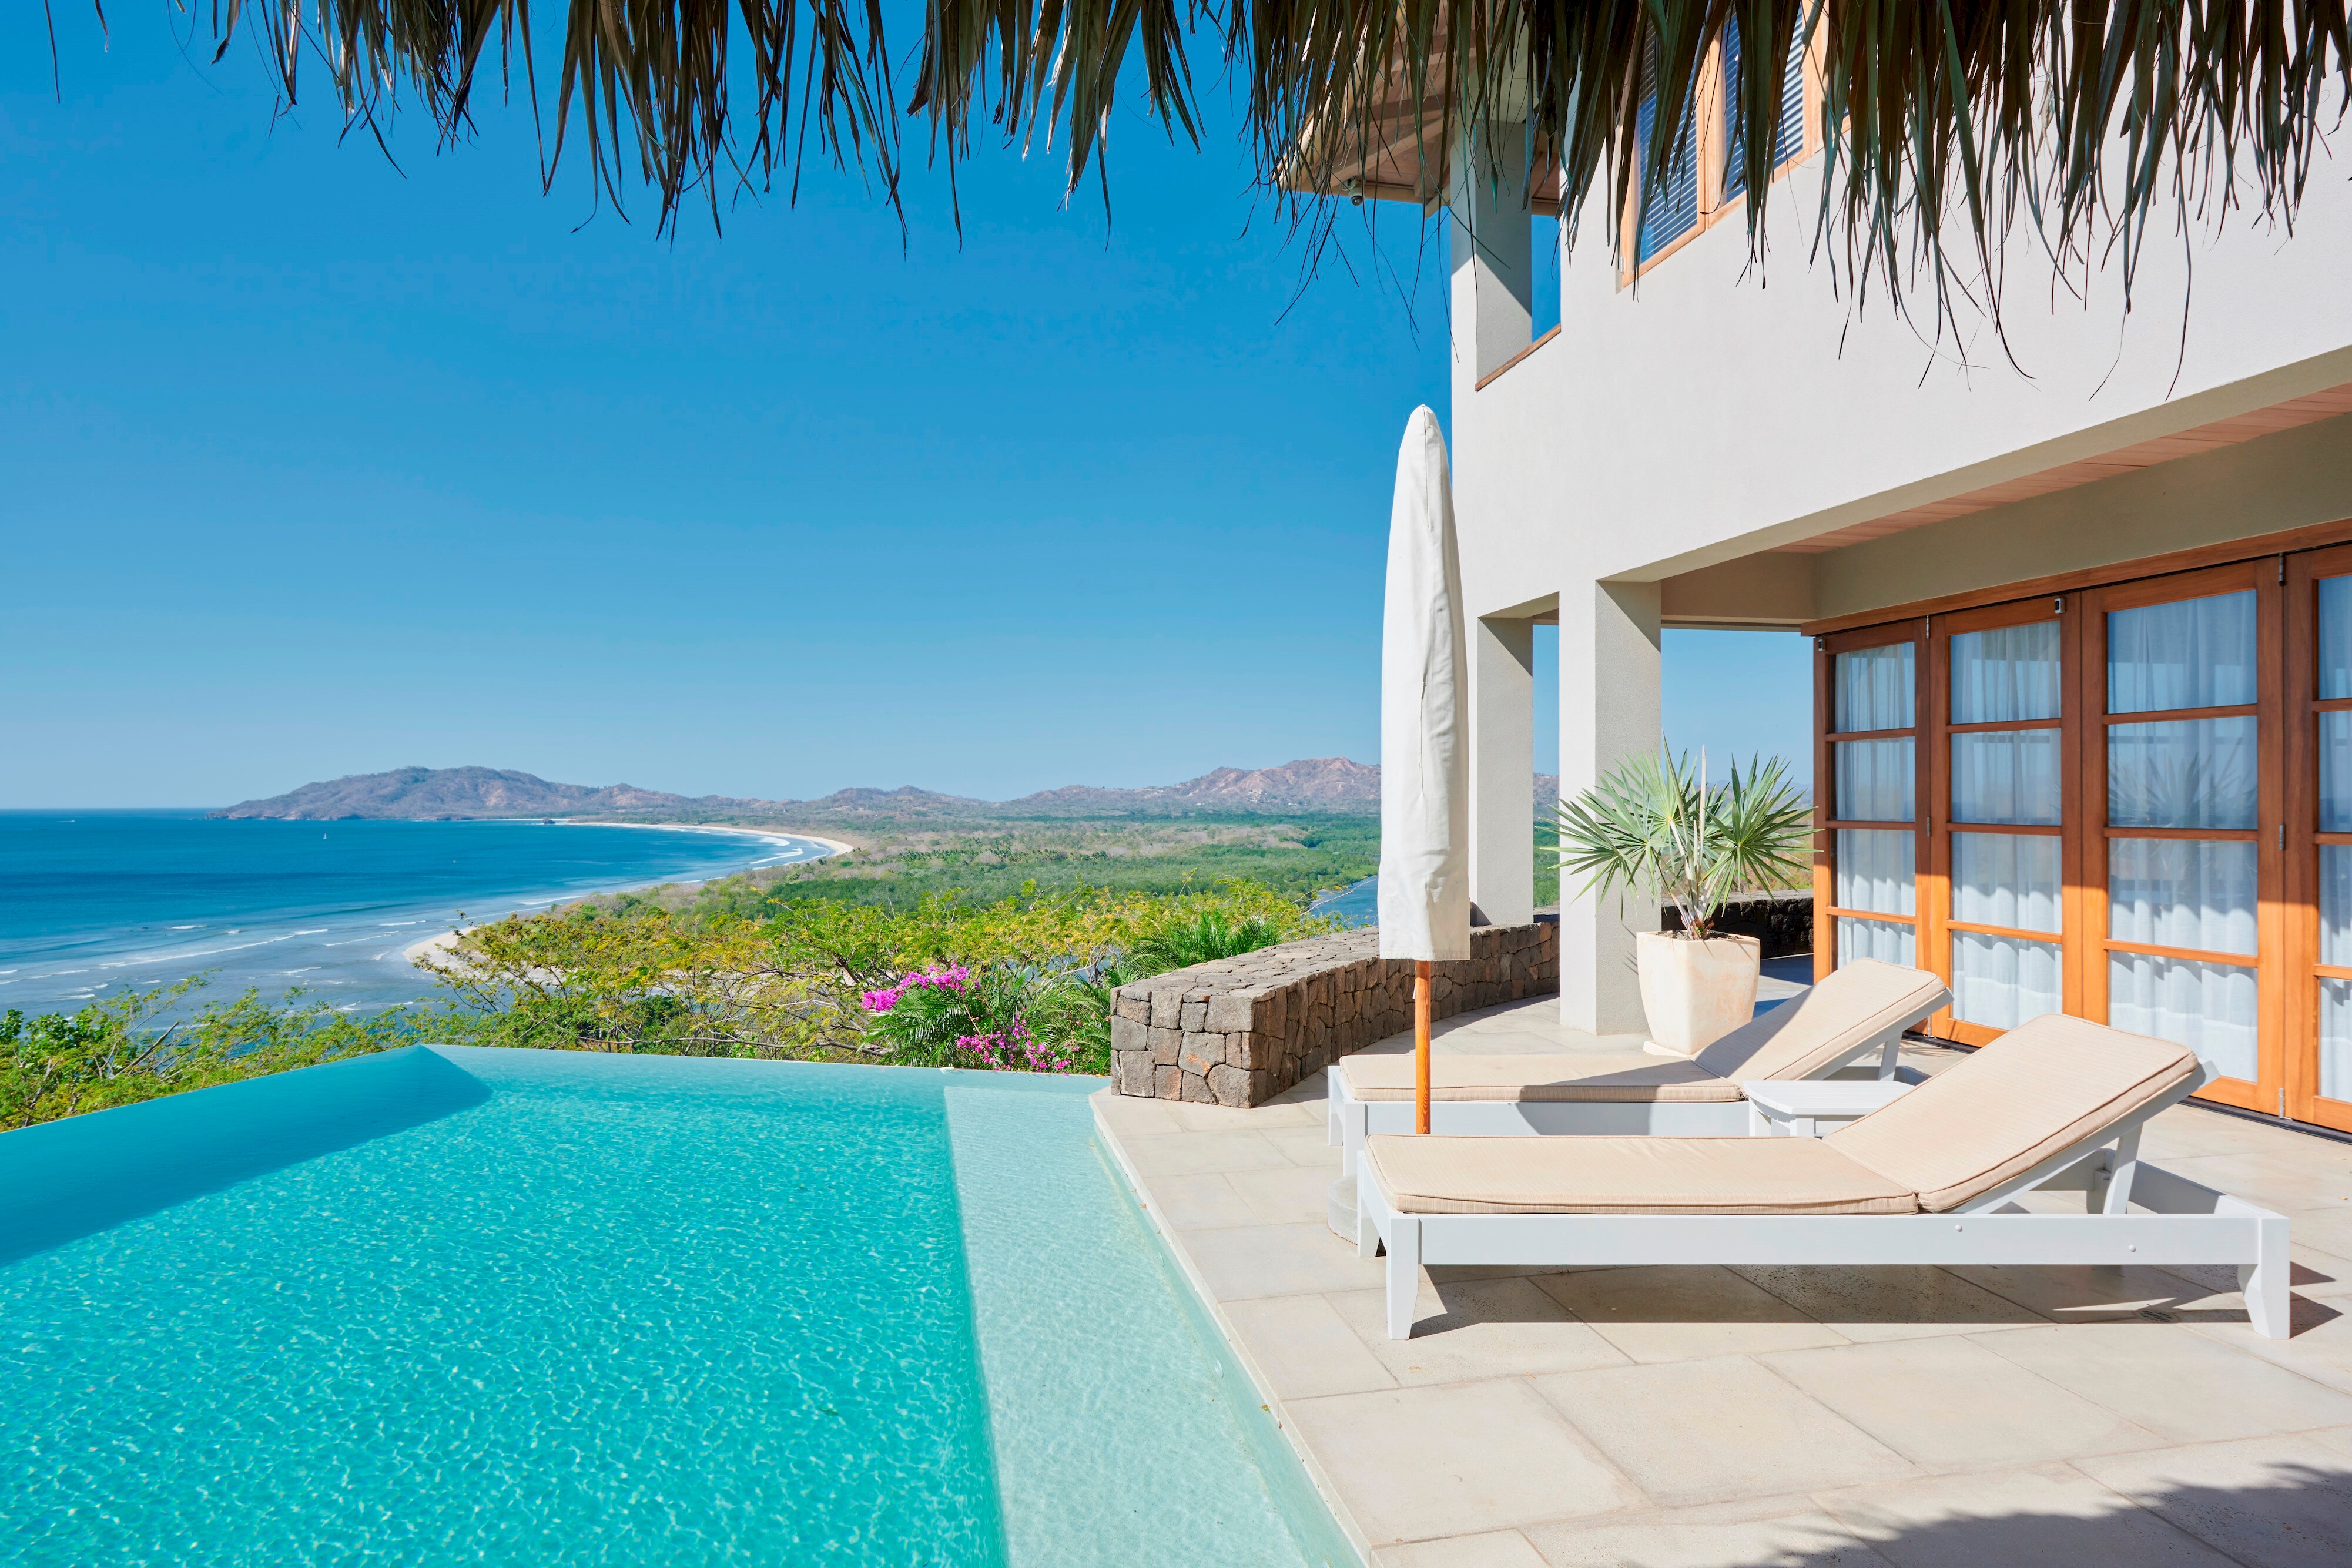 Welcome to Villa Royal Where Luxury Meets Serenity!